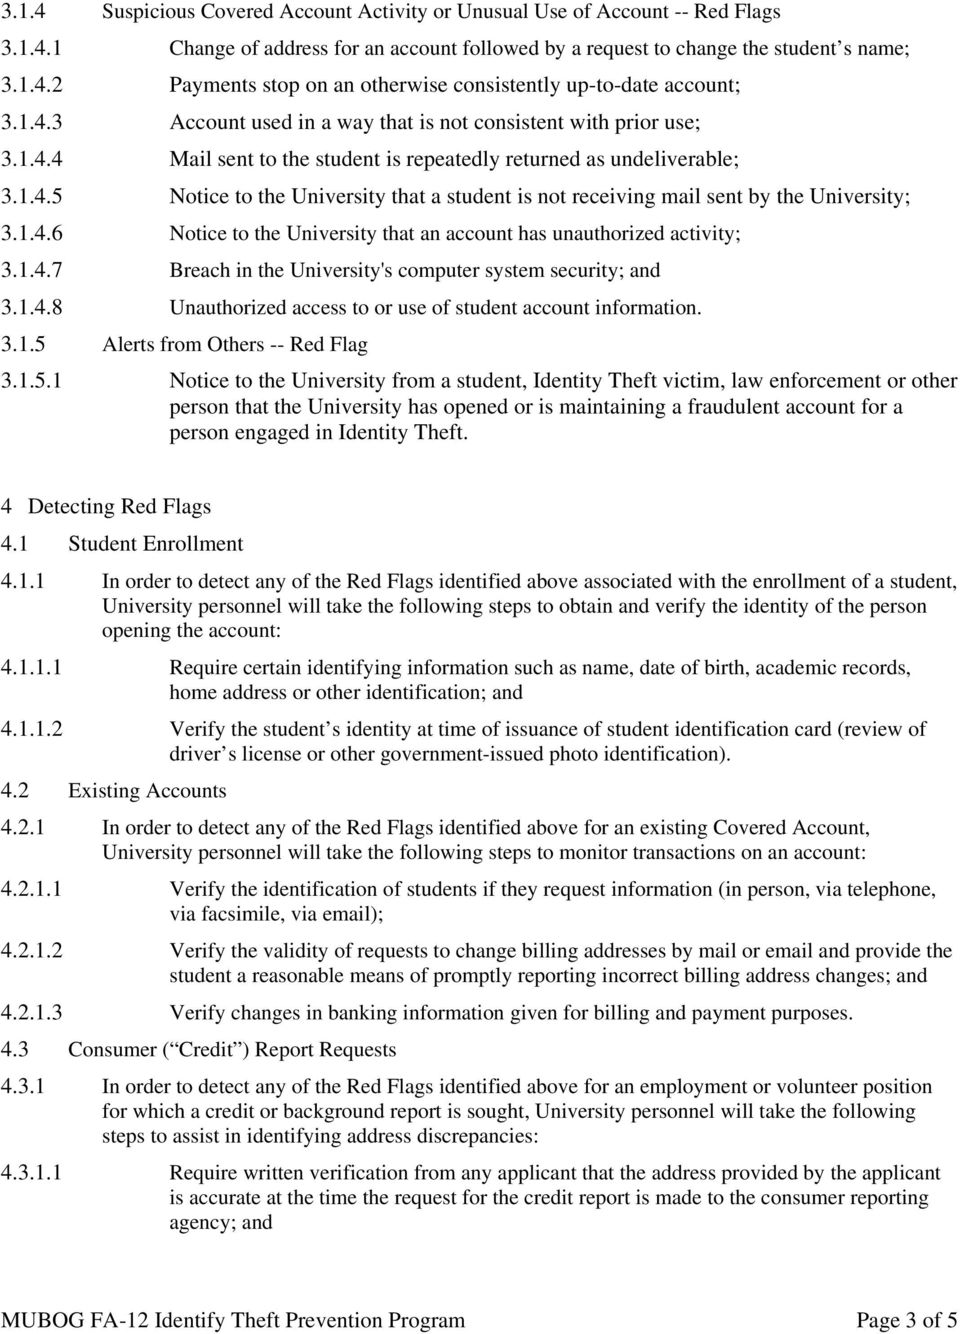 1.4.6 Notice to the University that an account has unauthorized activity; 3.1.4.7 Breach in the University's computer system security; and 3.1.4.8 Unauthorized access to or use of student account information.